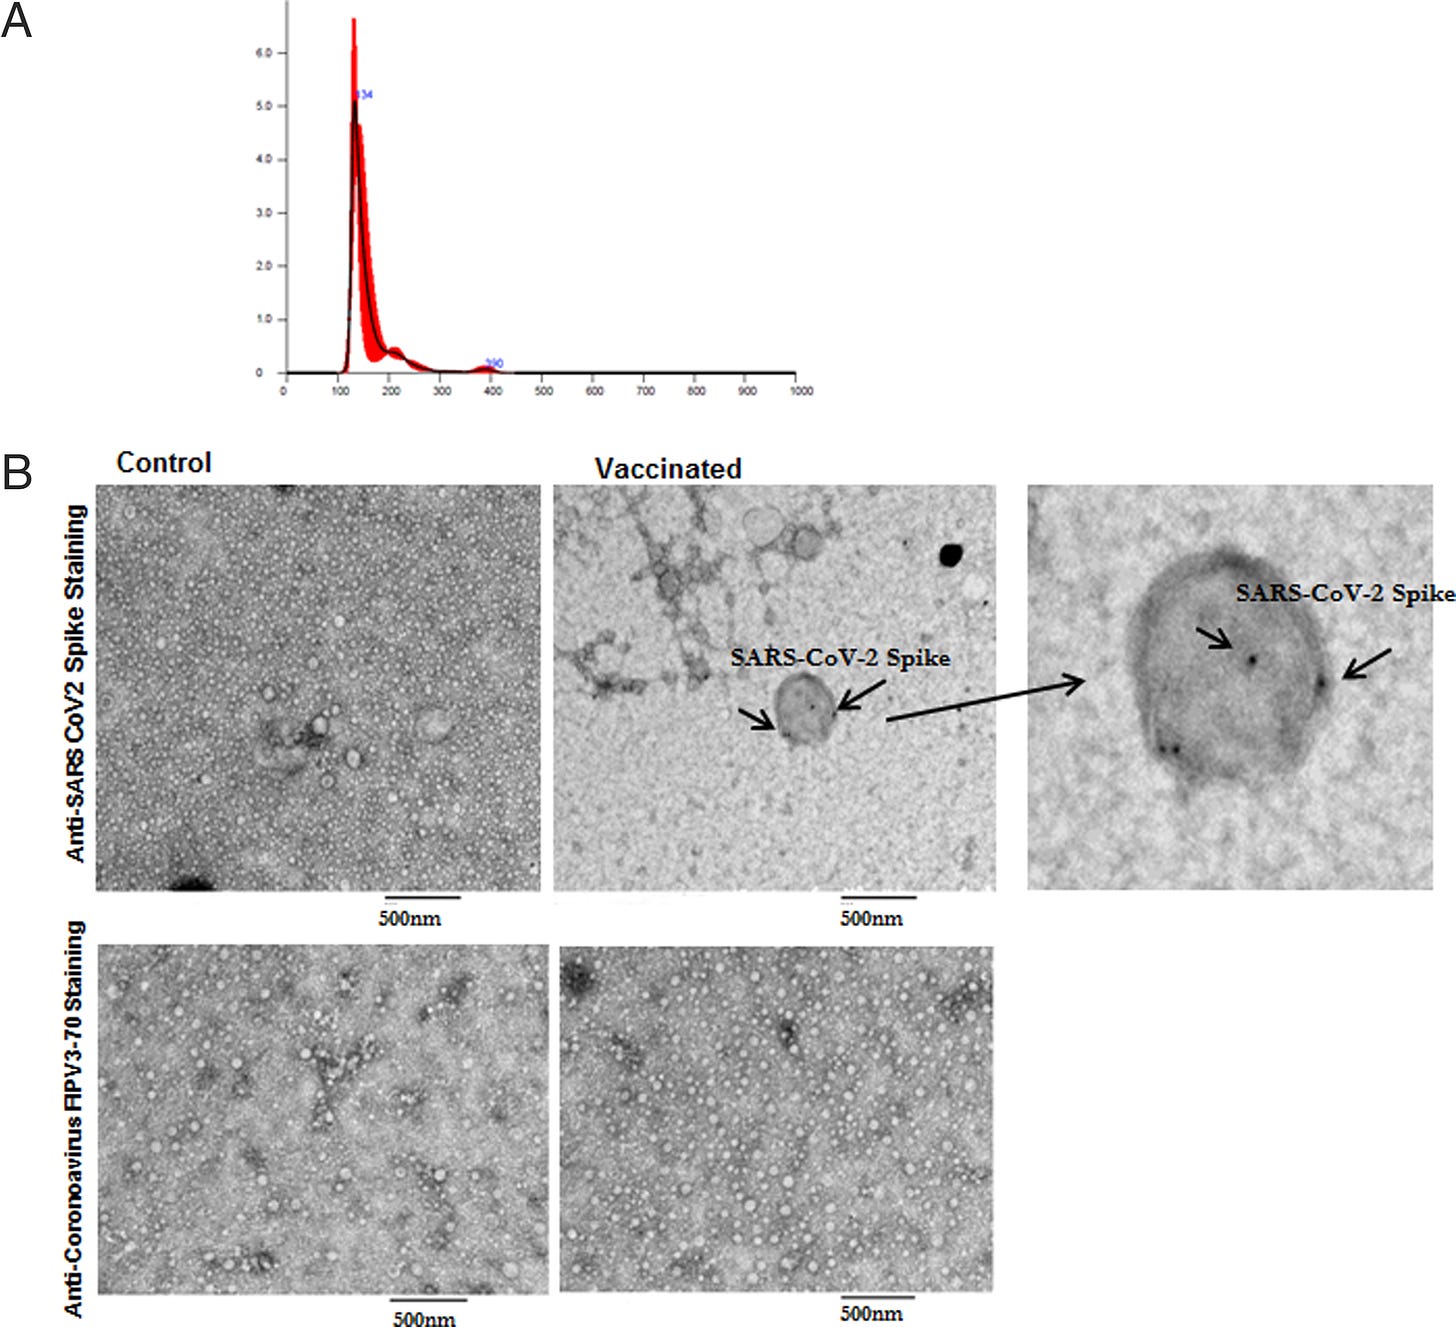 (A) Representative NanoSight image for exosomes from vaccinated individuals with mean and median sizes (black thin line in the graph indicates the three measurements of the same sample, and red line is the average of all three lines). (B) Transmission electron microscopy images of SARS-CoV-2 spike Ag on exosomes from control exosomes from control and vaccinated individuals. Arrows indicate SARS-CoV-2 spike-positive exosomes. Right side, third image is the zoomed image of positive exosome from vaccinated sample (original magnification x 50,000). We have used anti-coronavirus FIPV3-70 Ab as negative control for both the samples.